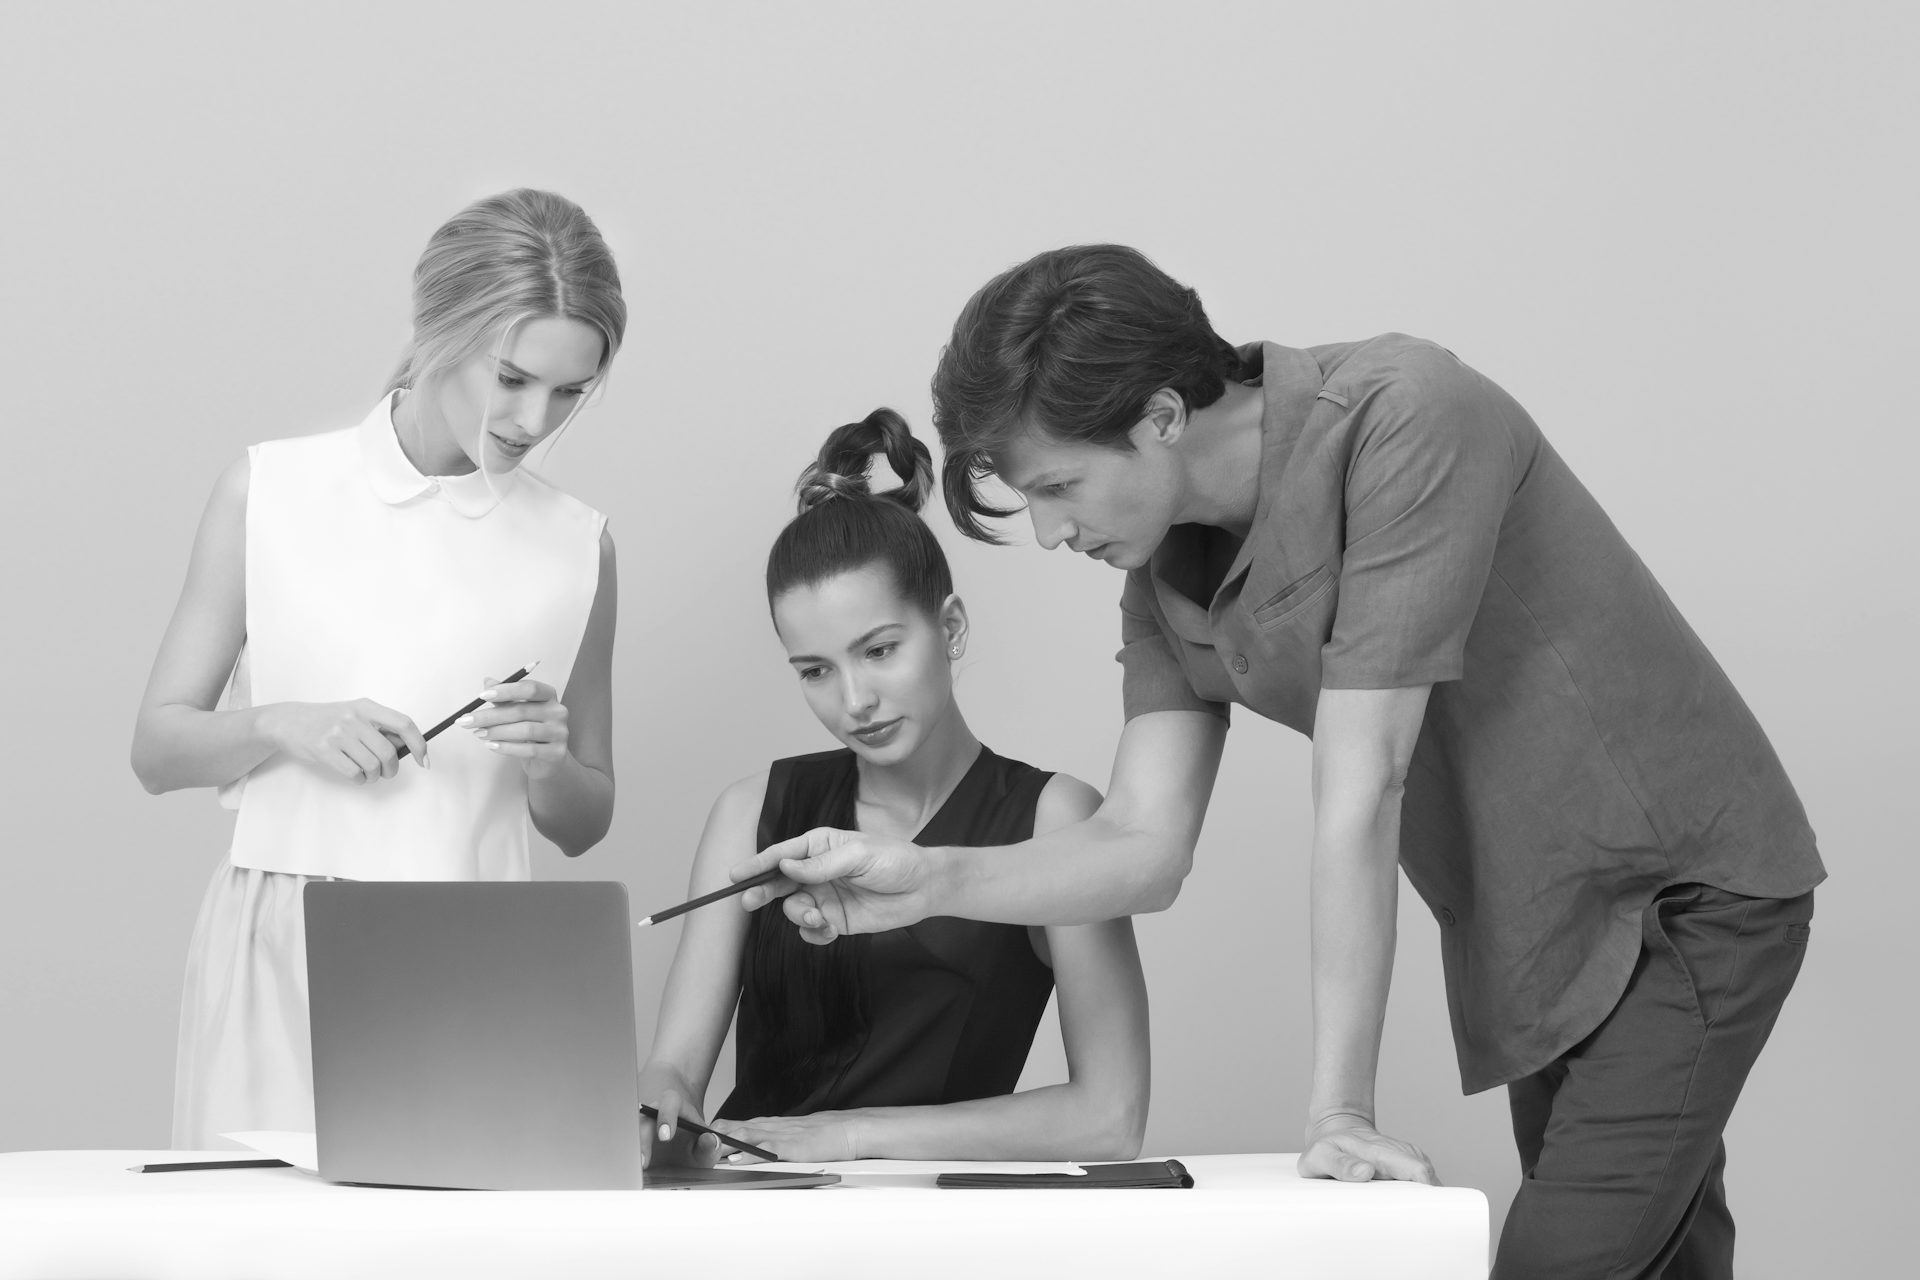 A group of people (Two male and one Female) sitting around a computer.